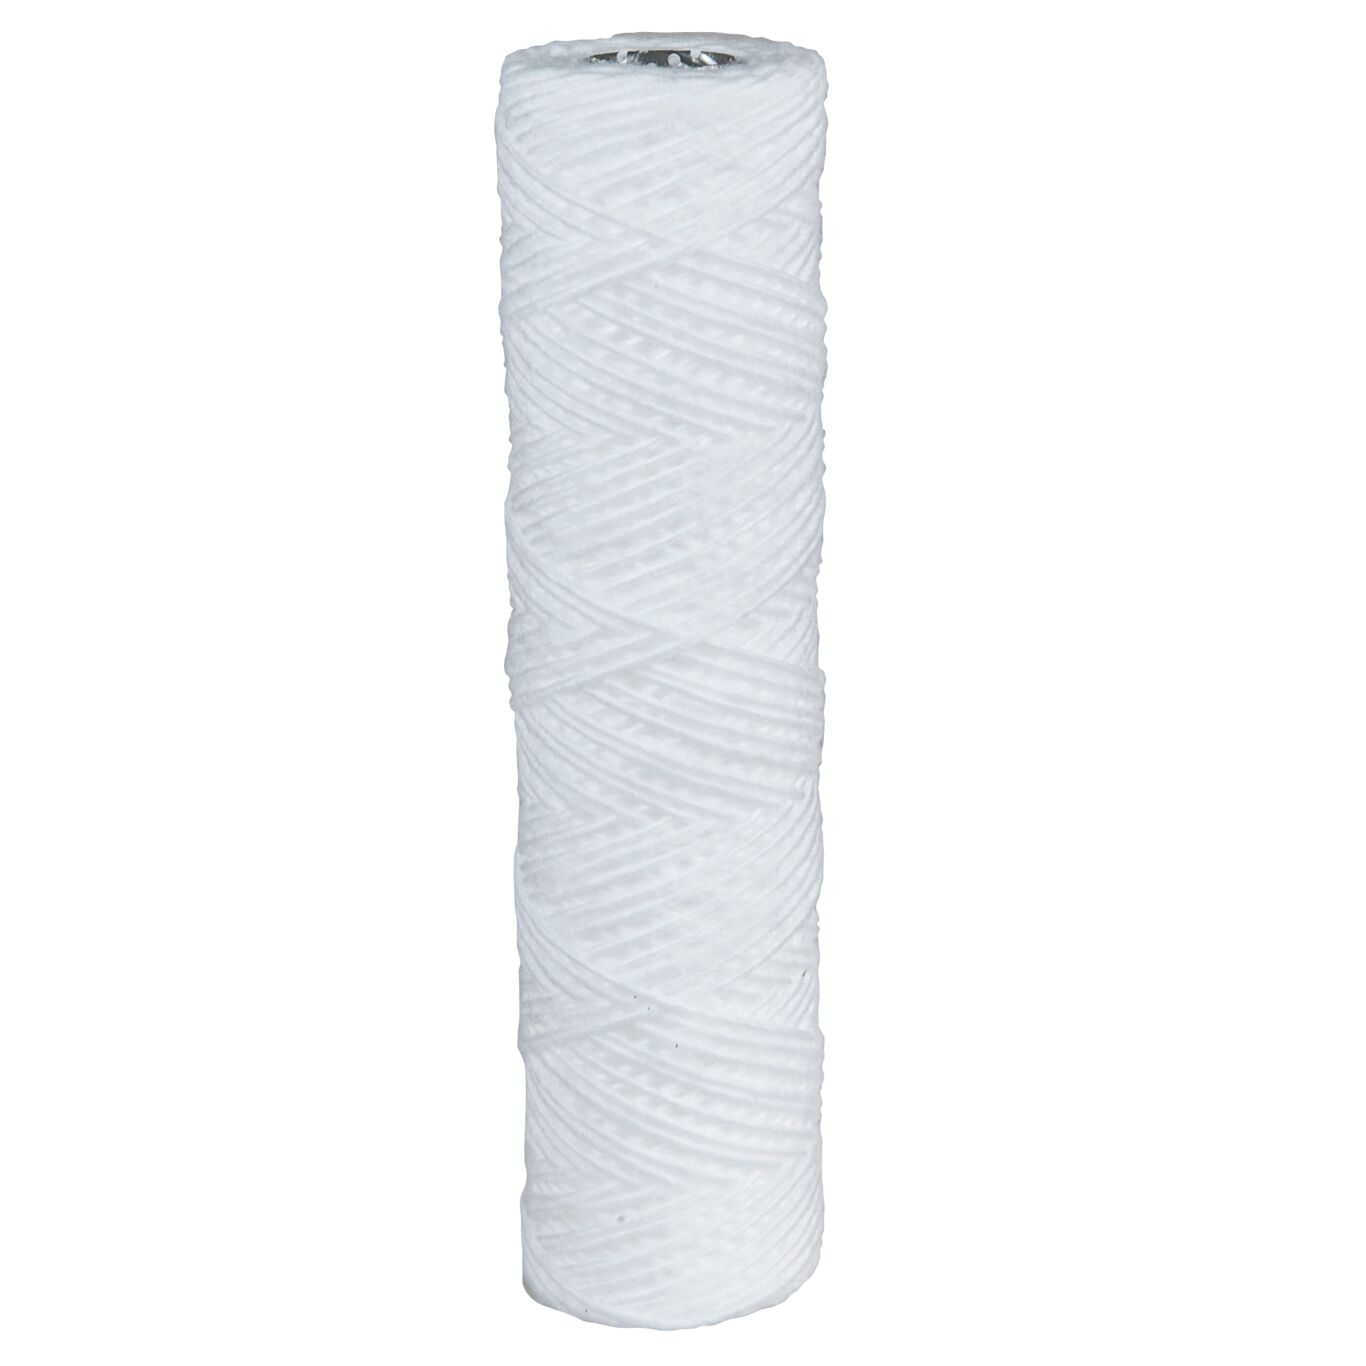 Product Image -  String Wound Filter Cartridge with Stainless Steel Center Tube